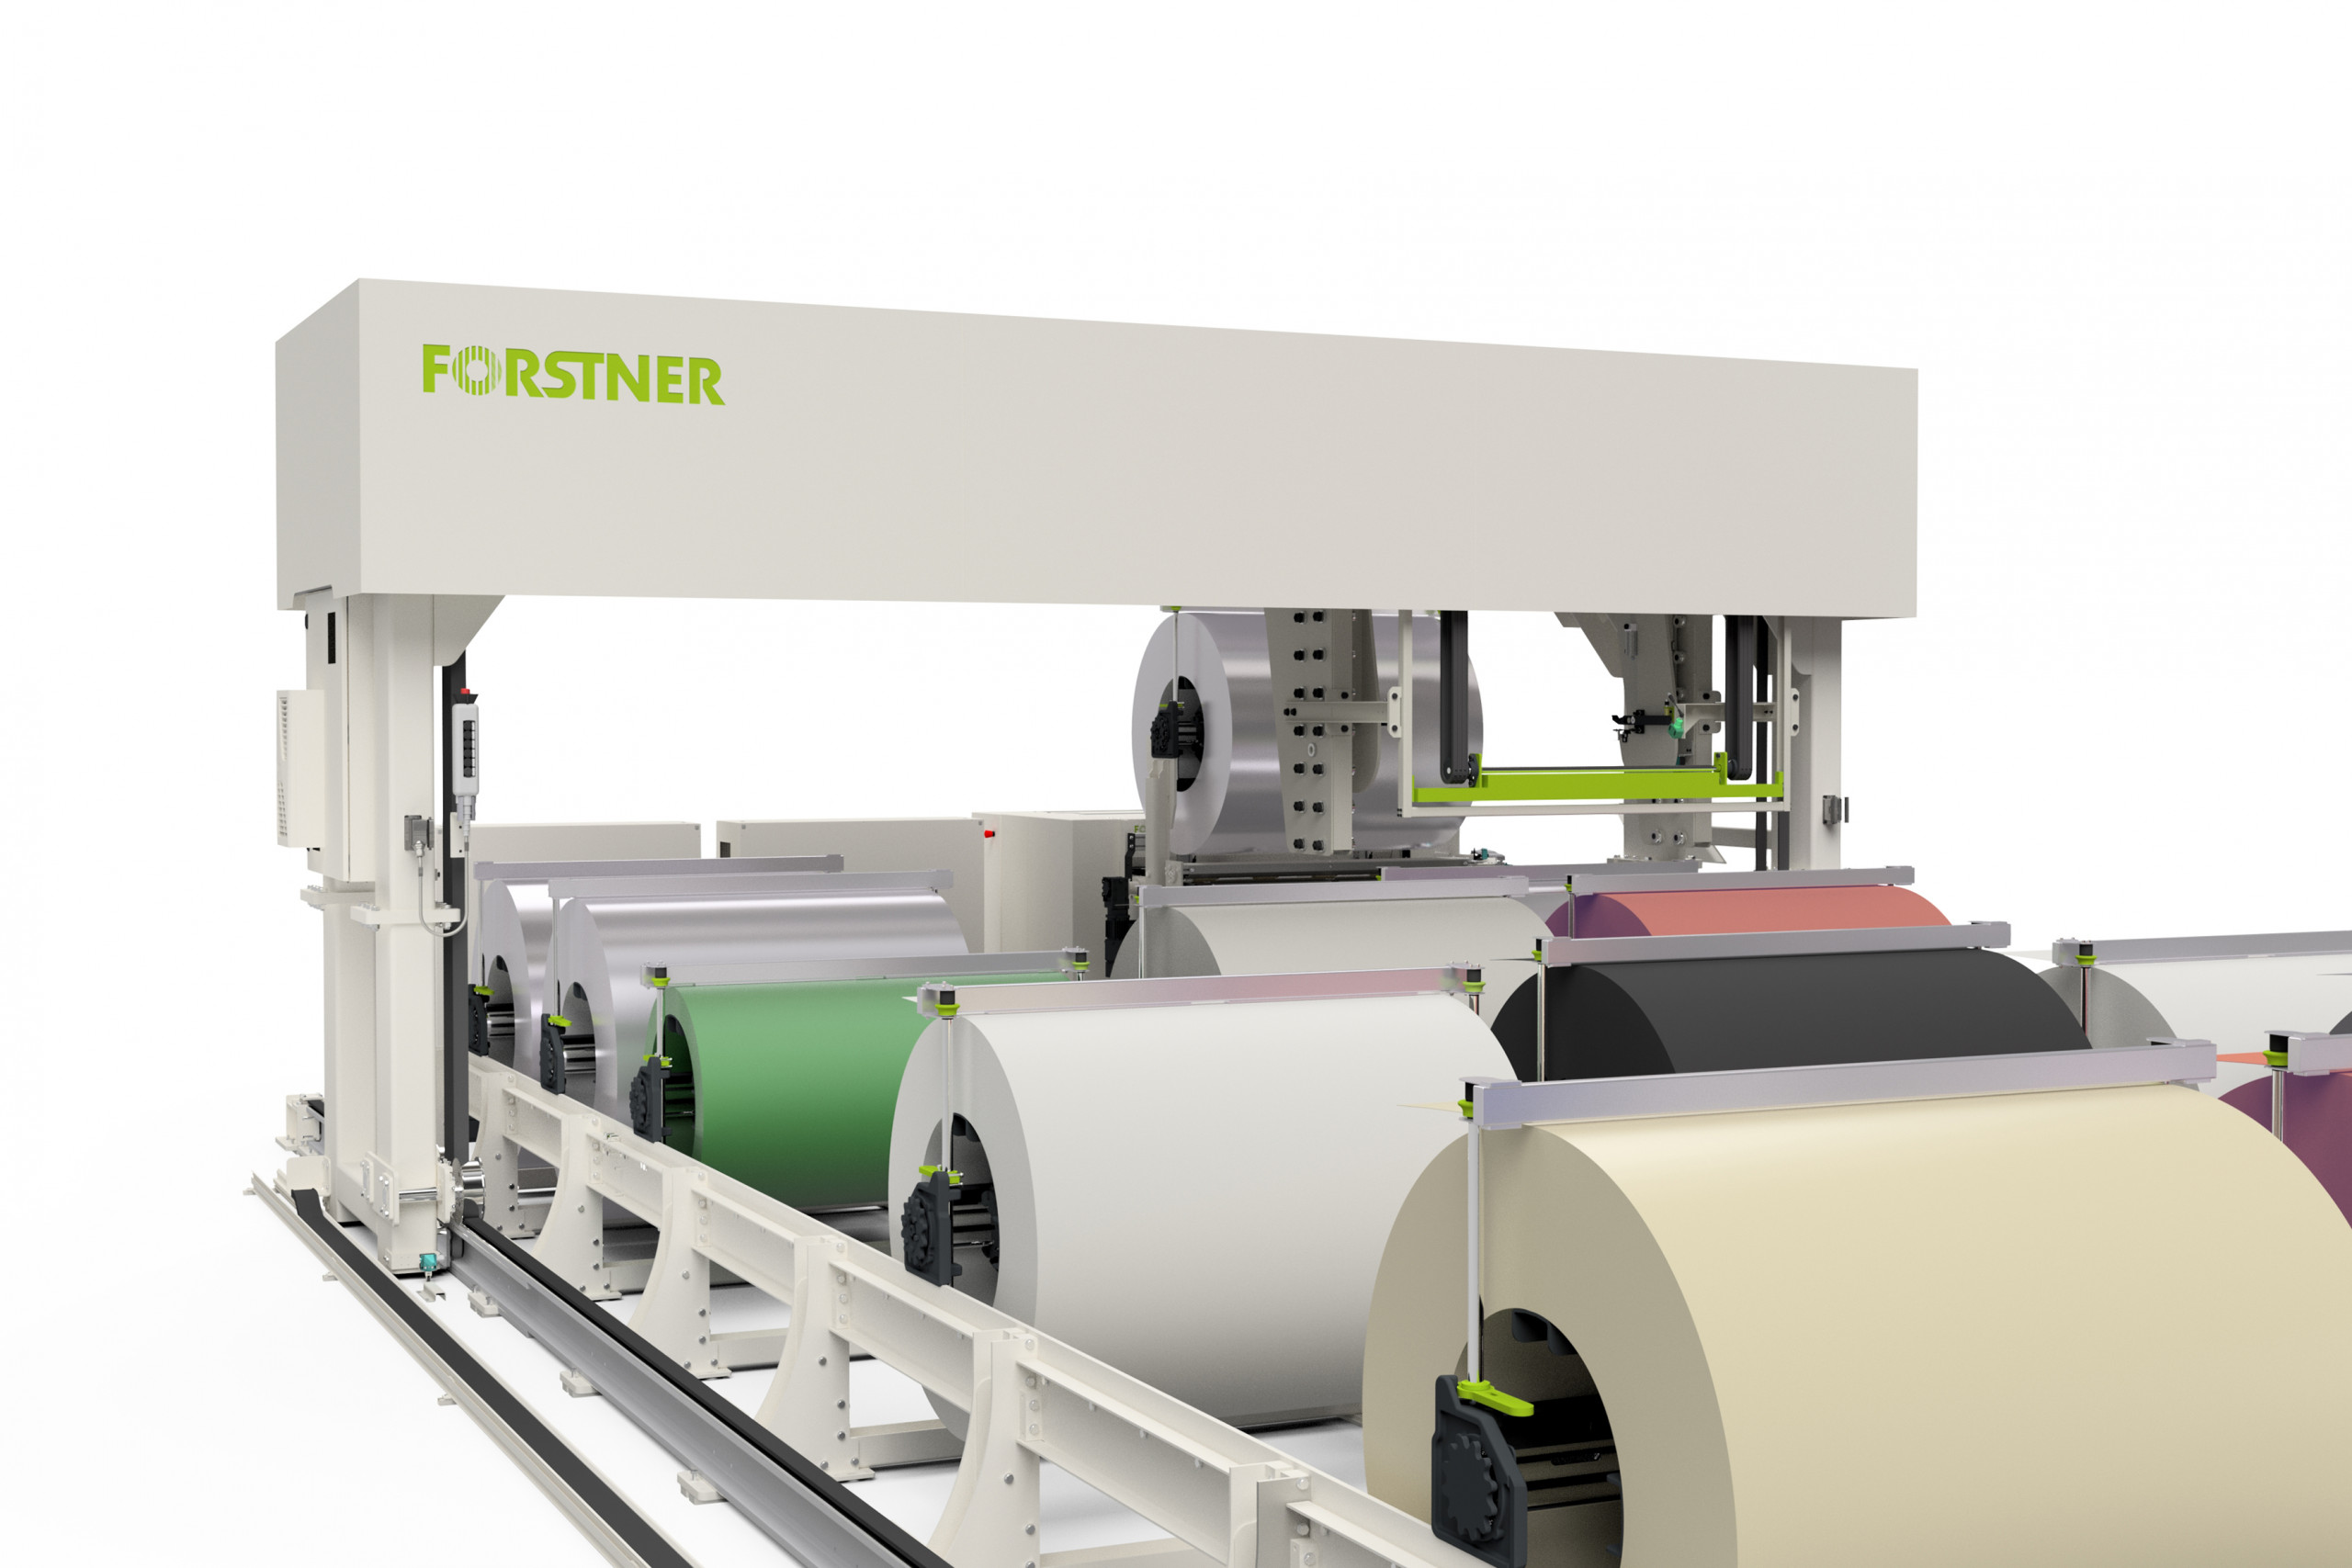 The Forstner system reduces set-up times to a minimum. © Cidan